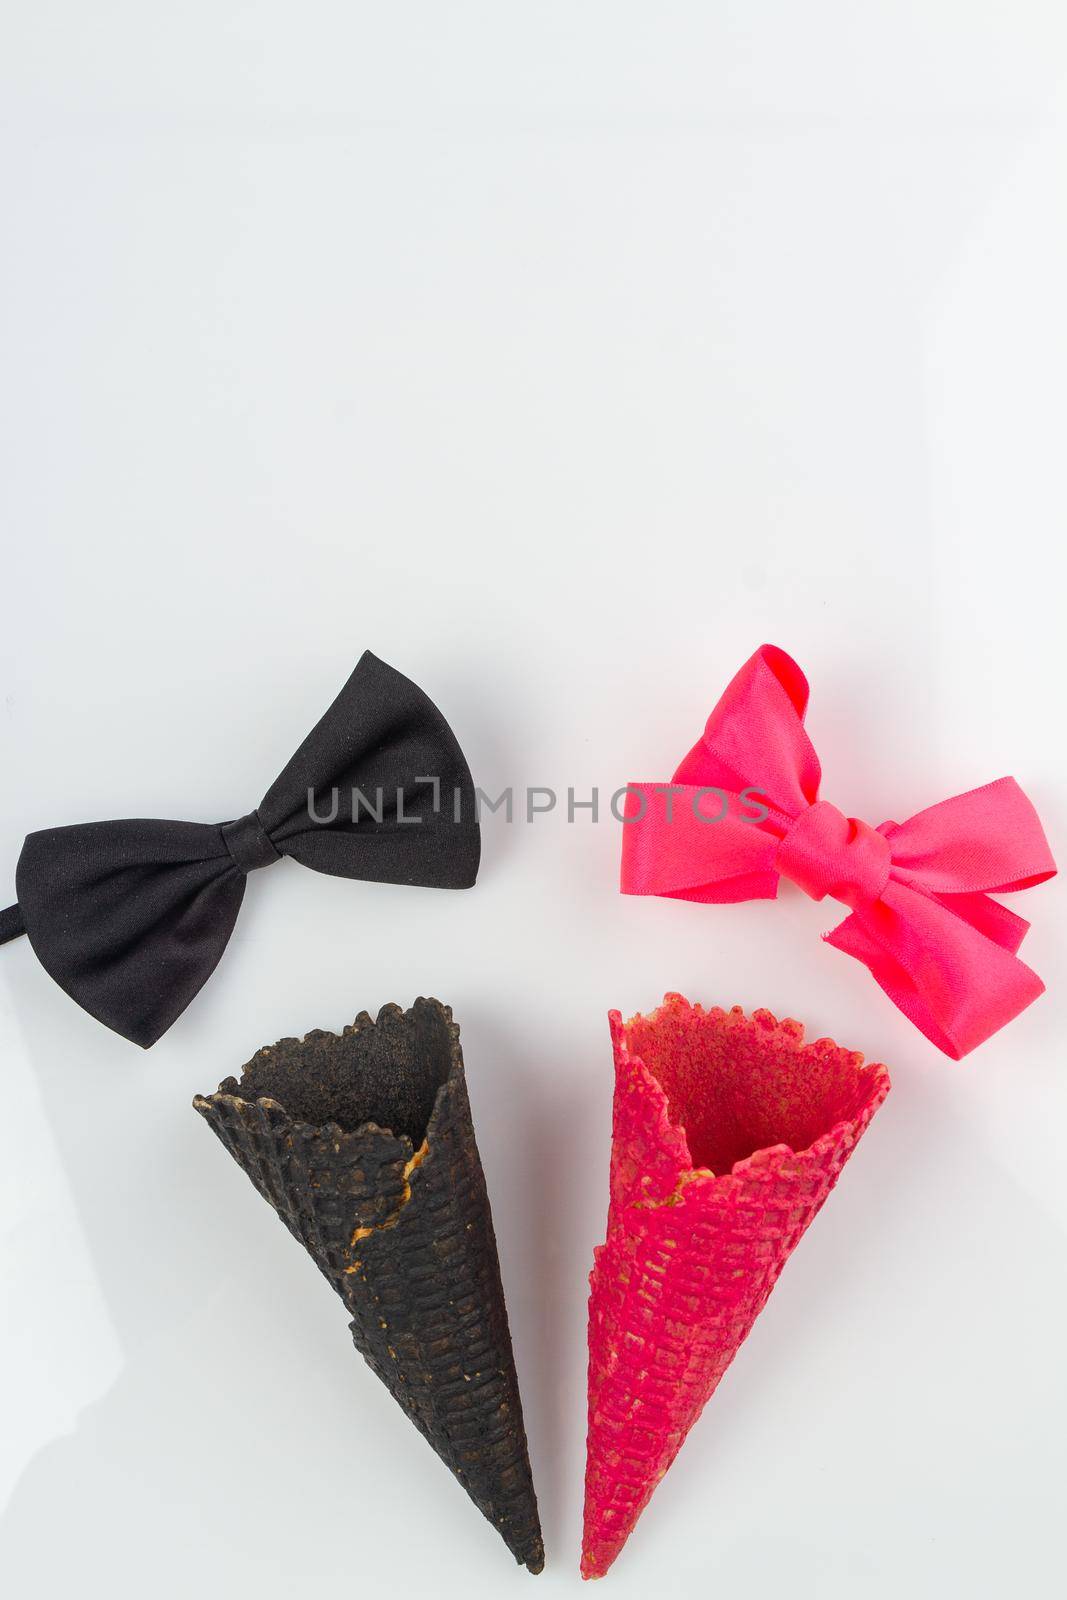 Black and pink waffle cones with bow ties. by super_picture